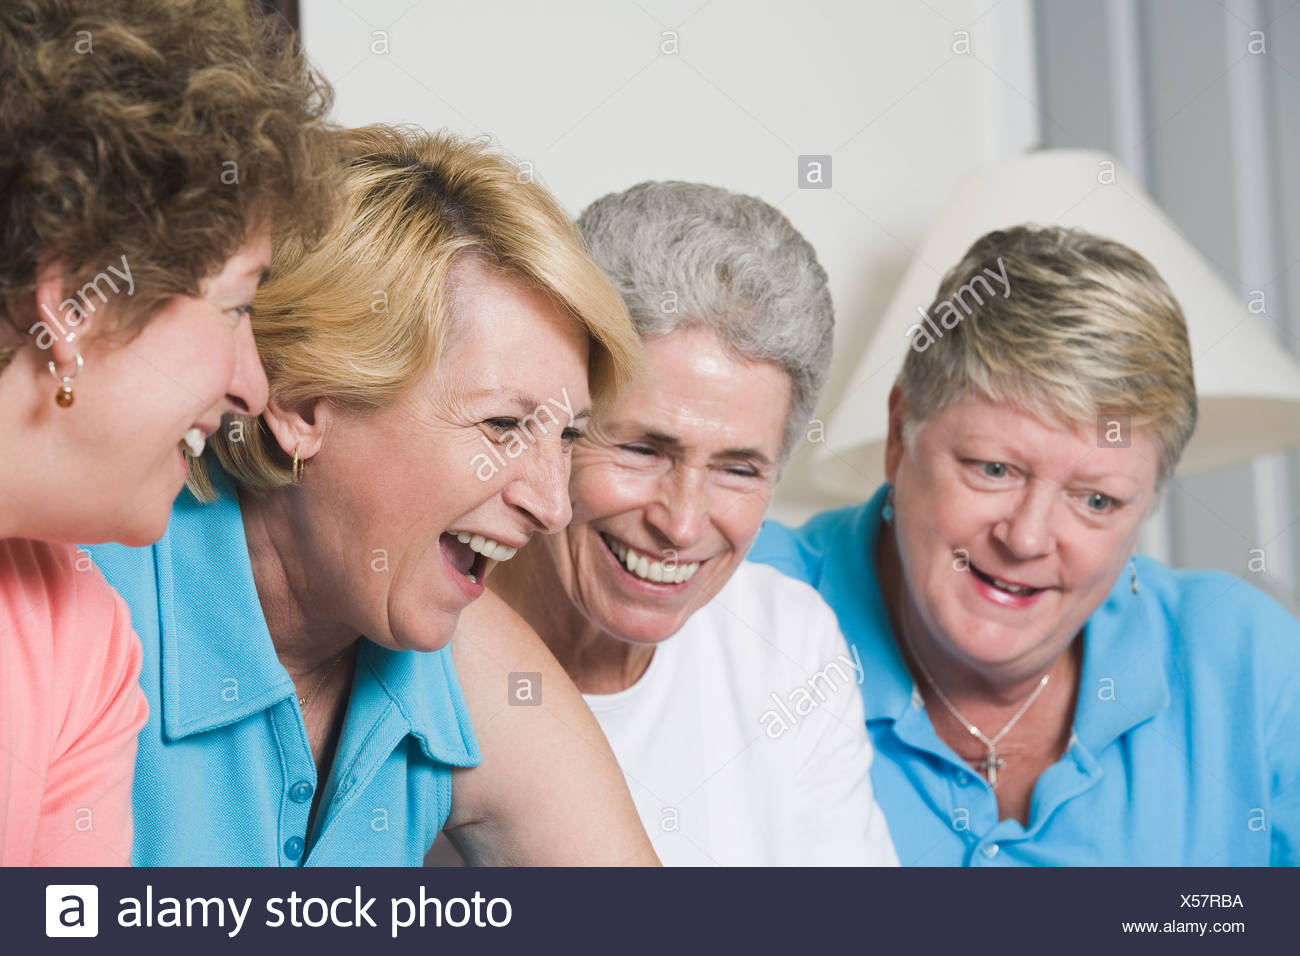 four-middle-aged-women-laughing-X57RBA.jpg